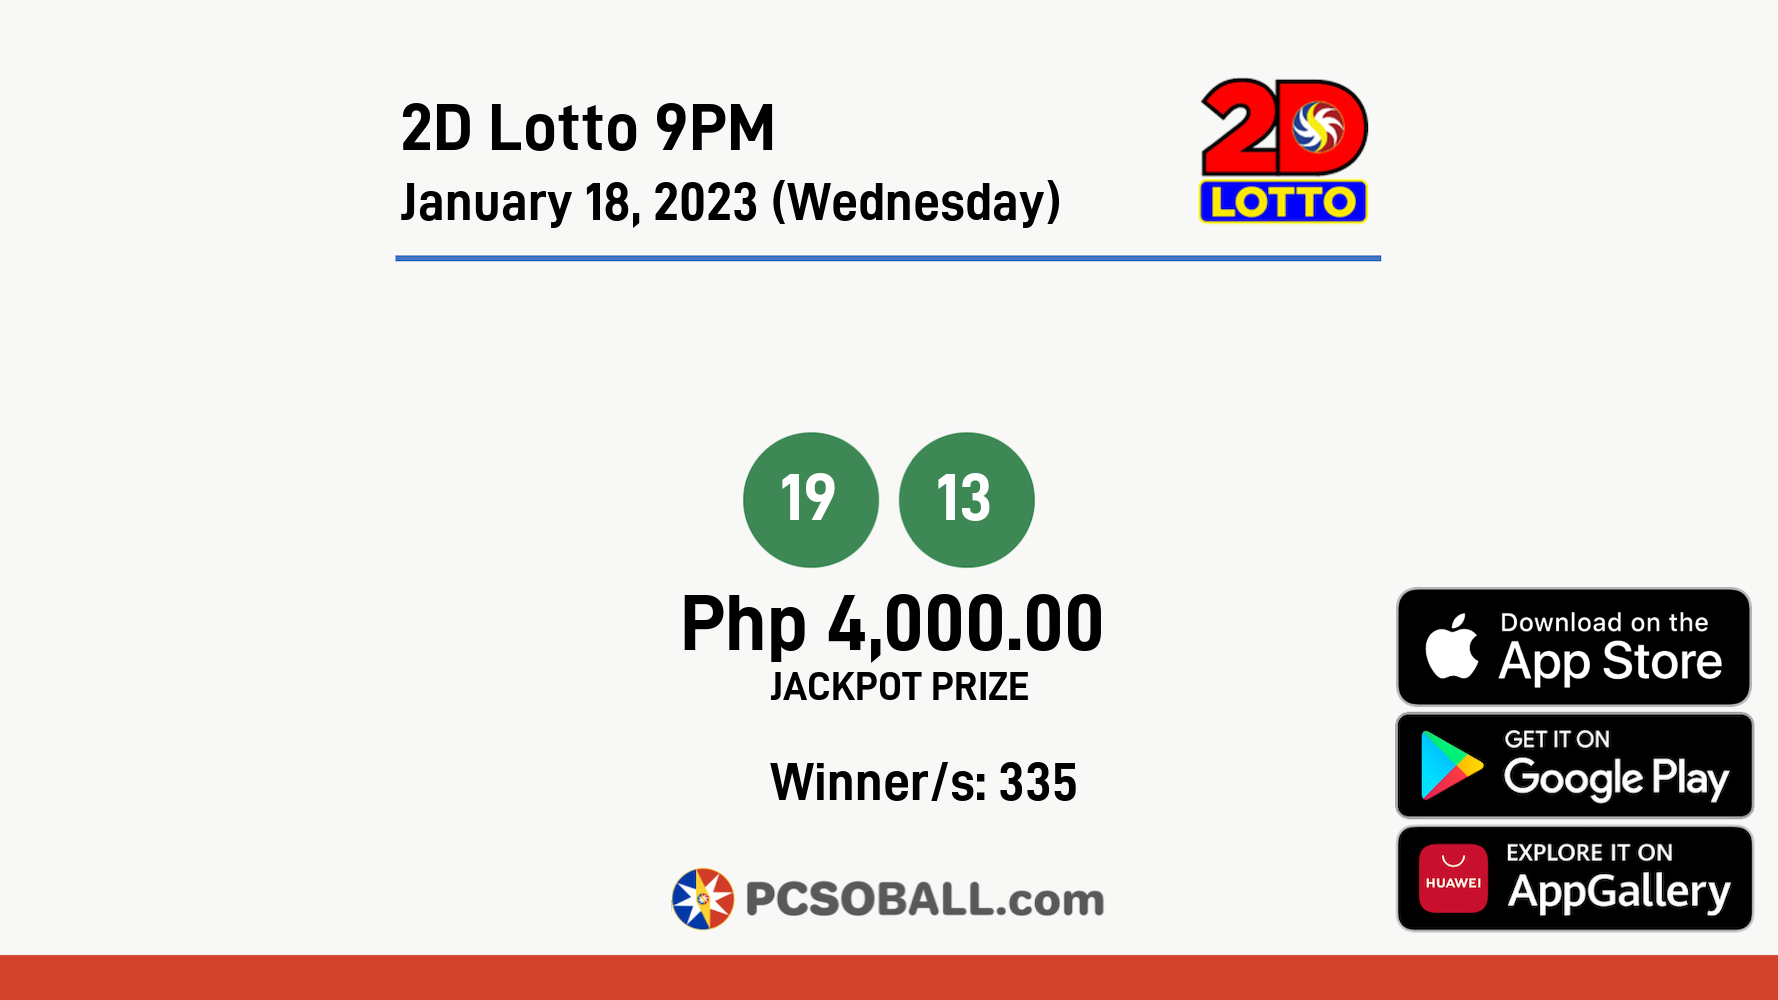 2D Lotto 9PM January 18, 2023 (Wednesday) Result